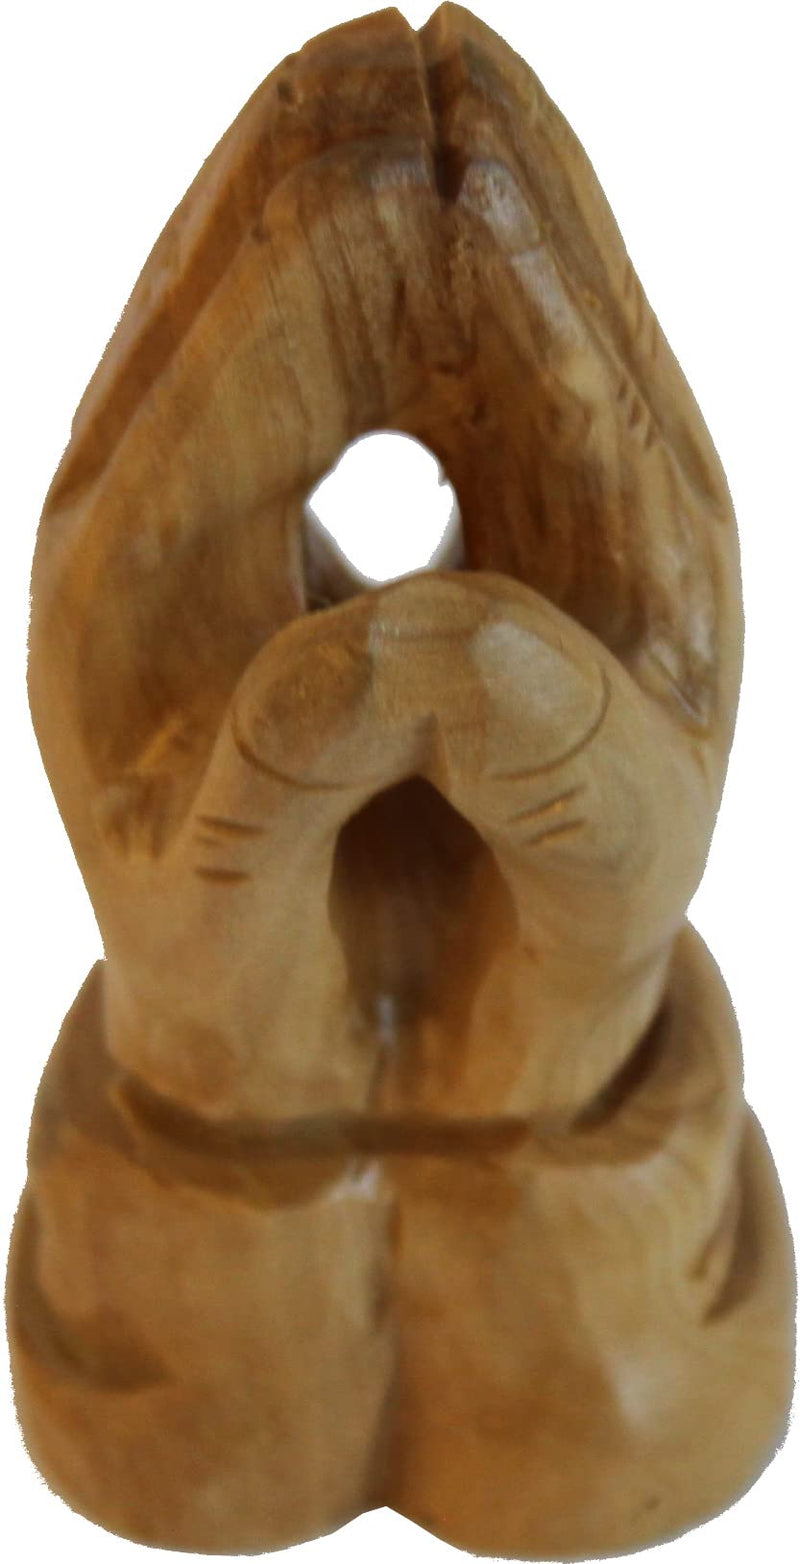 Holy Land Market Olivewood Praying Hands (7.5 cm or 3 Inch) - Small Hands